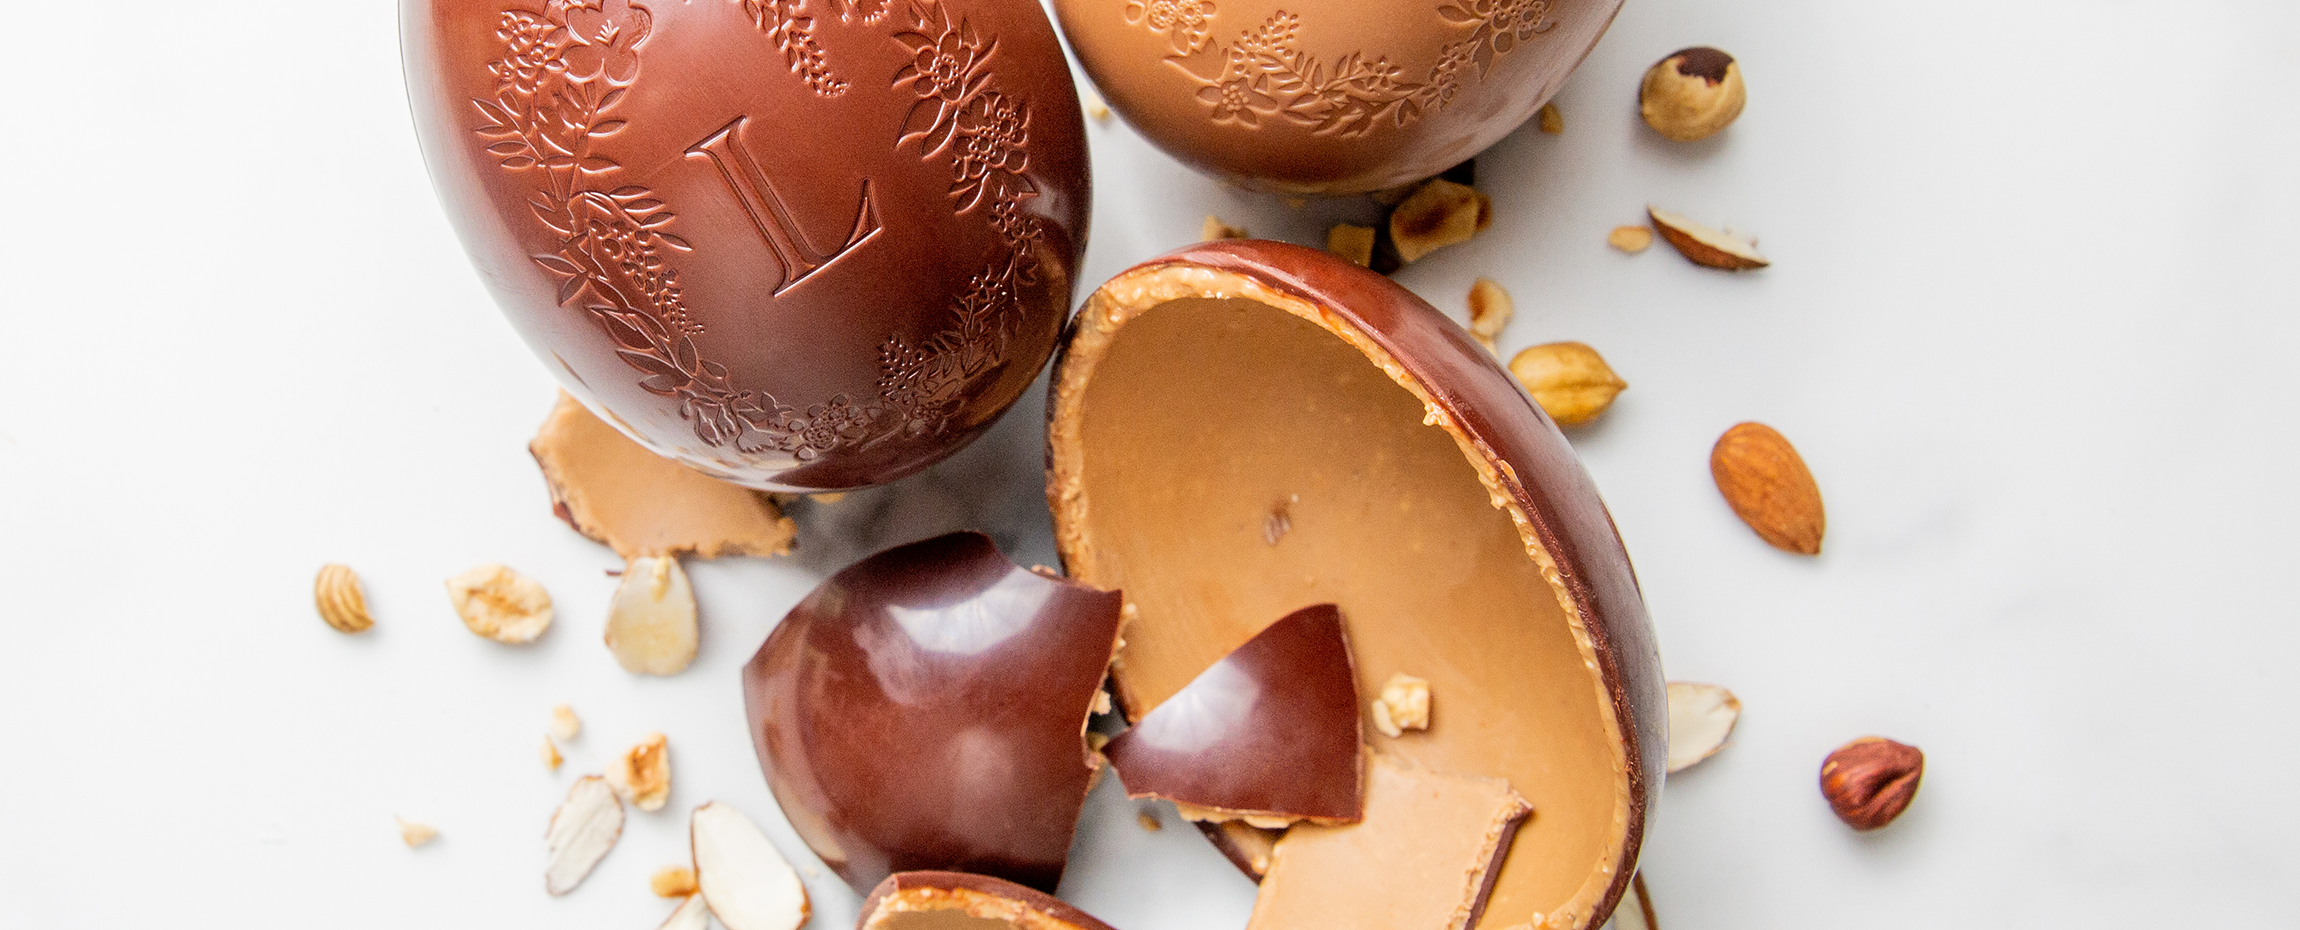 A free praliné filled egg from 70 CHF